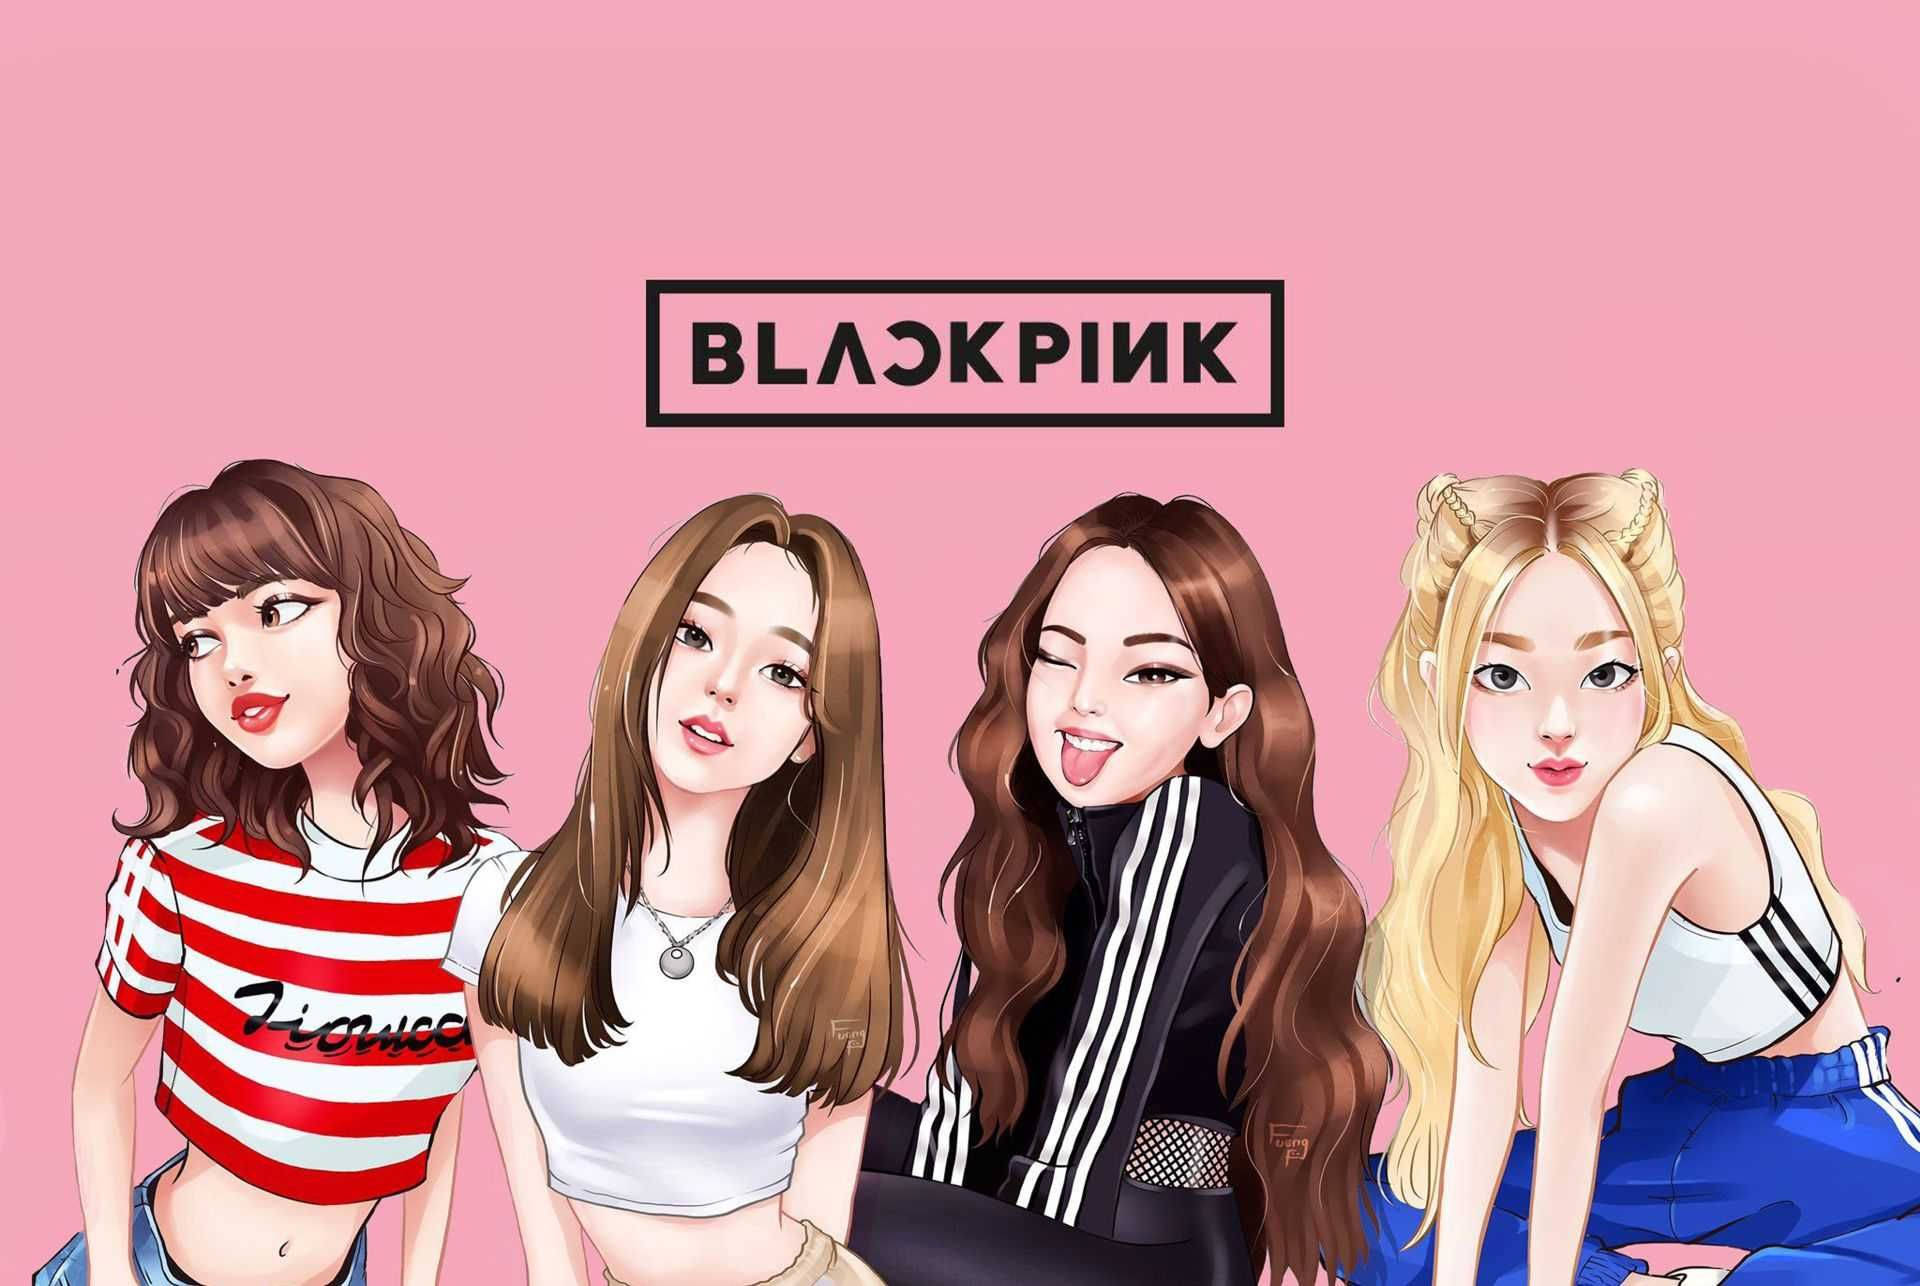 Blackpink Logo With Animated Members Background